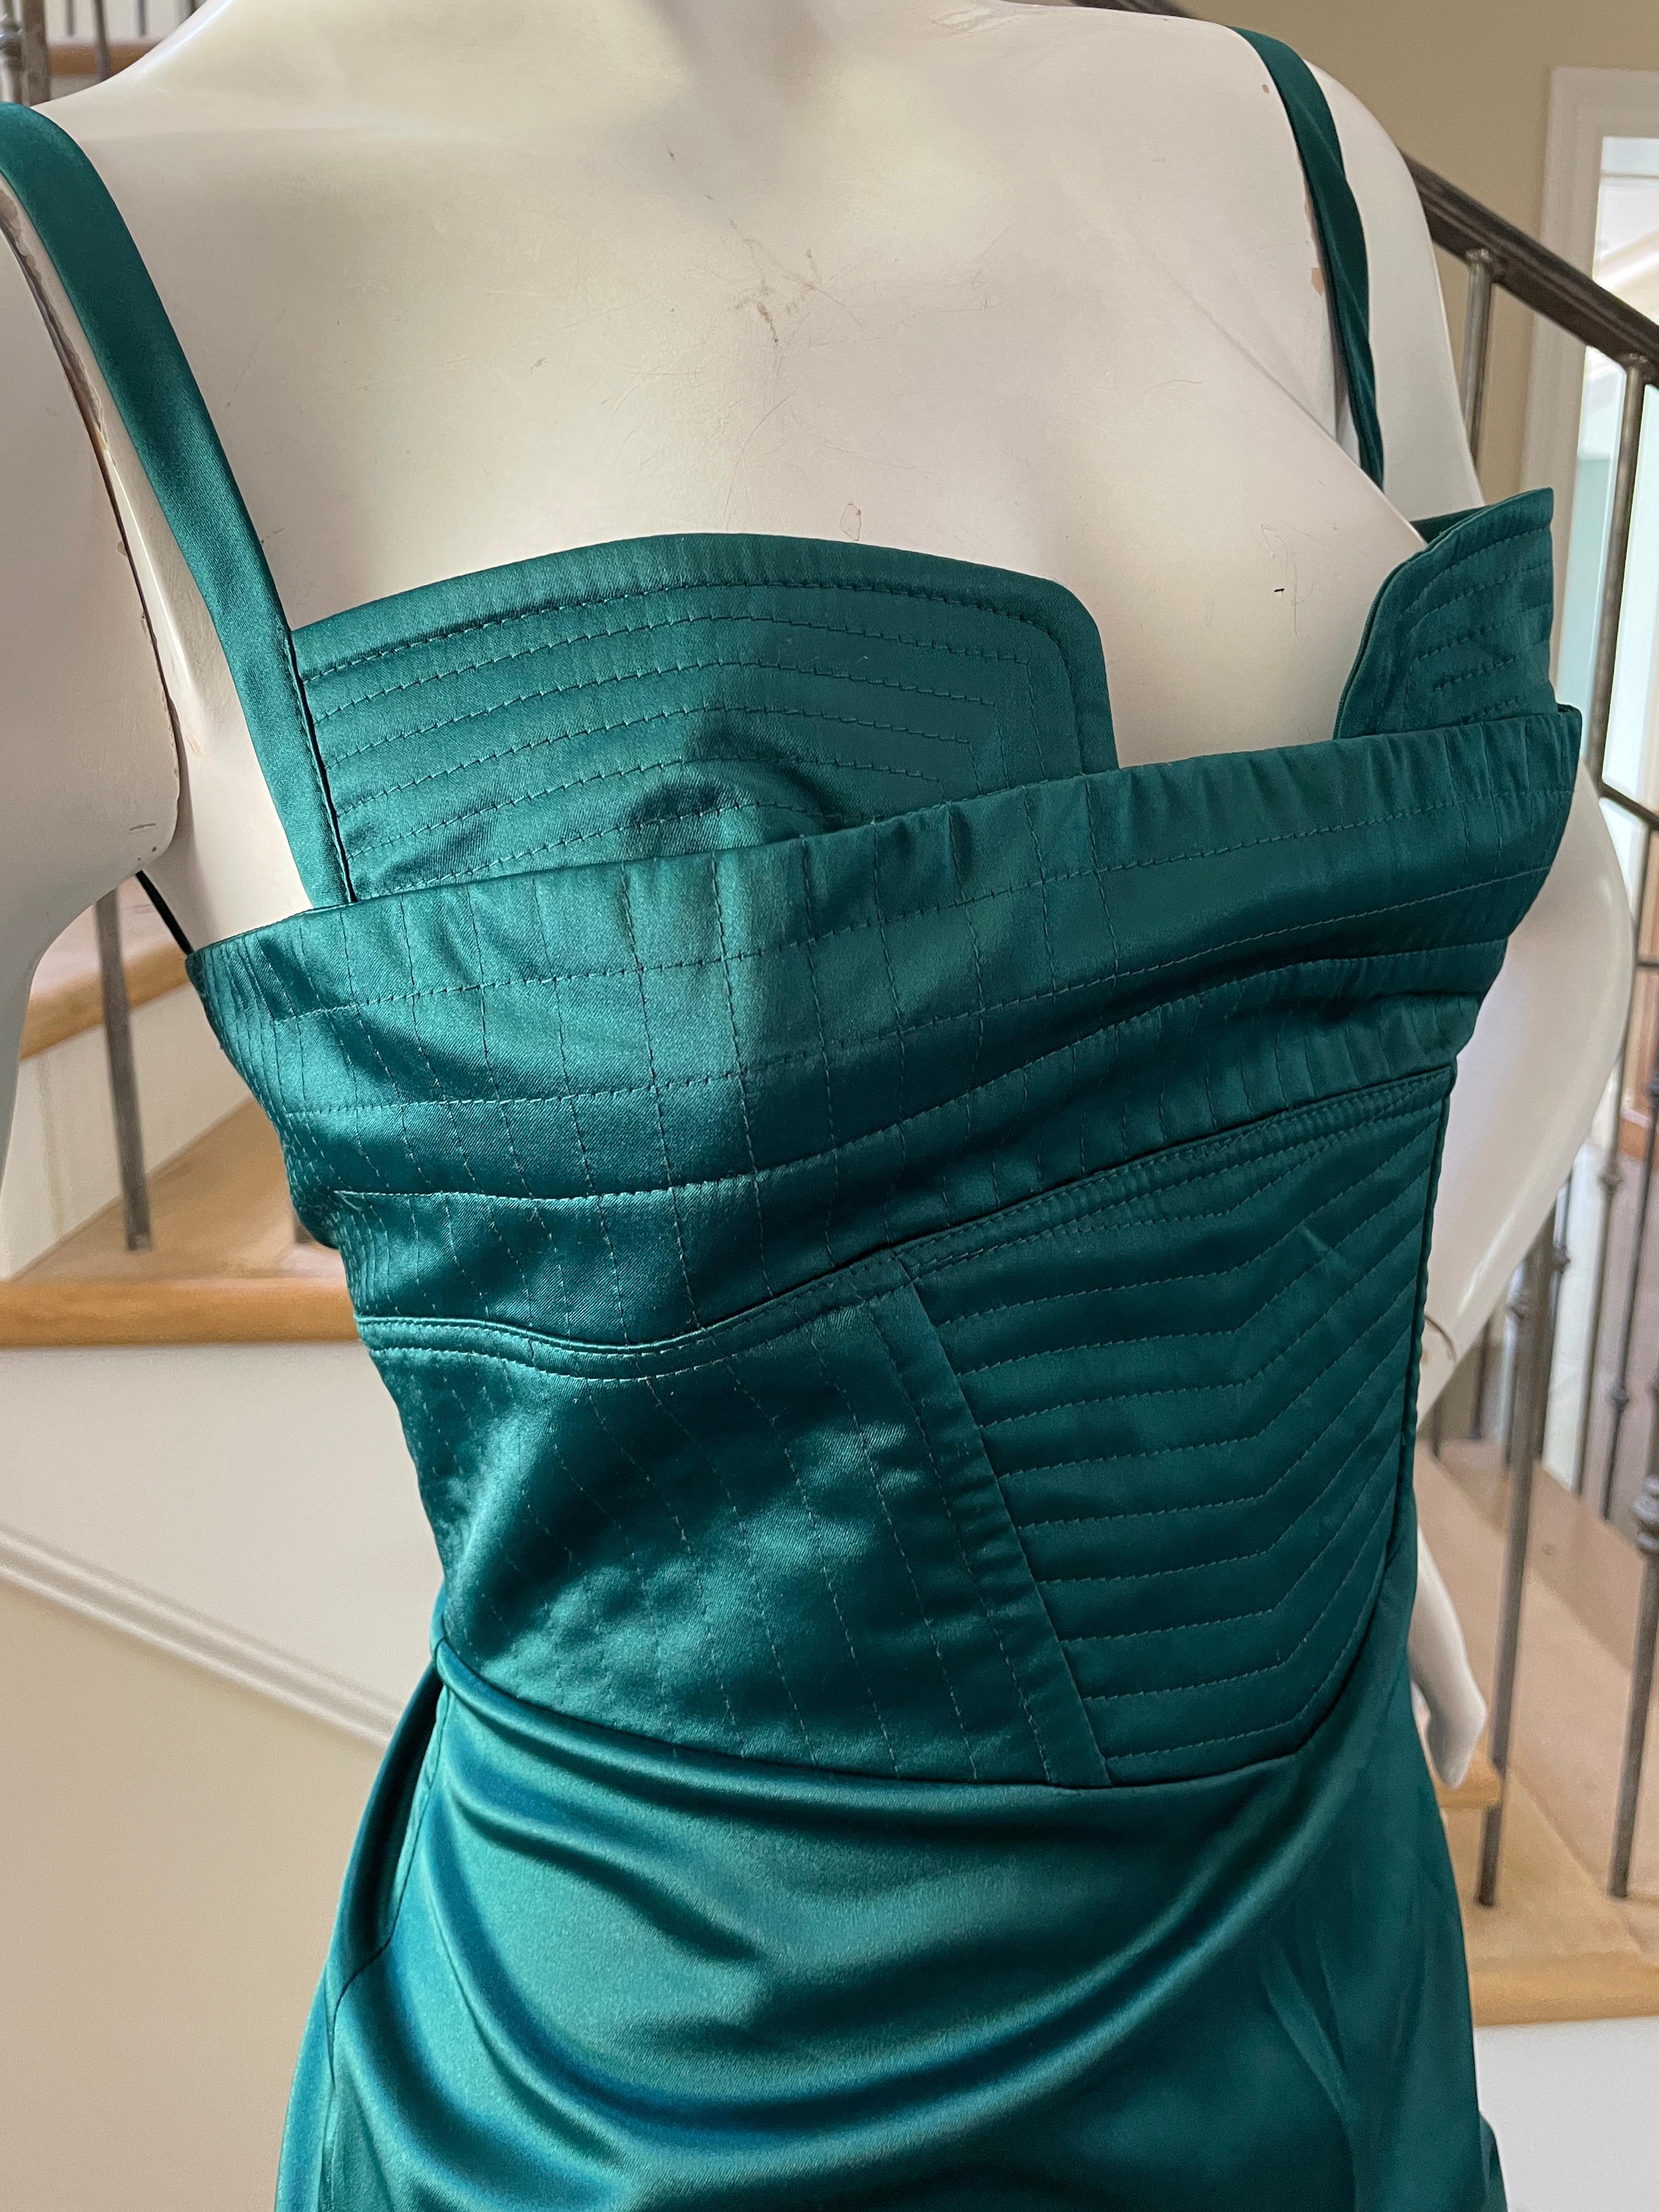 Just Cavalli Emerald Green Cocktail Dress by Roberto Cavalli In Excellent Condition For Sale In Cloverdale, CA